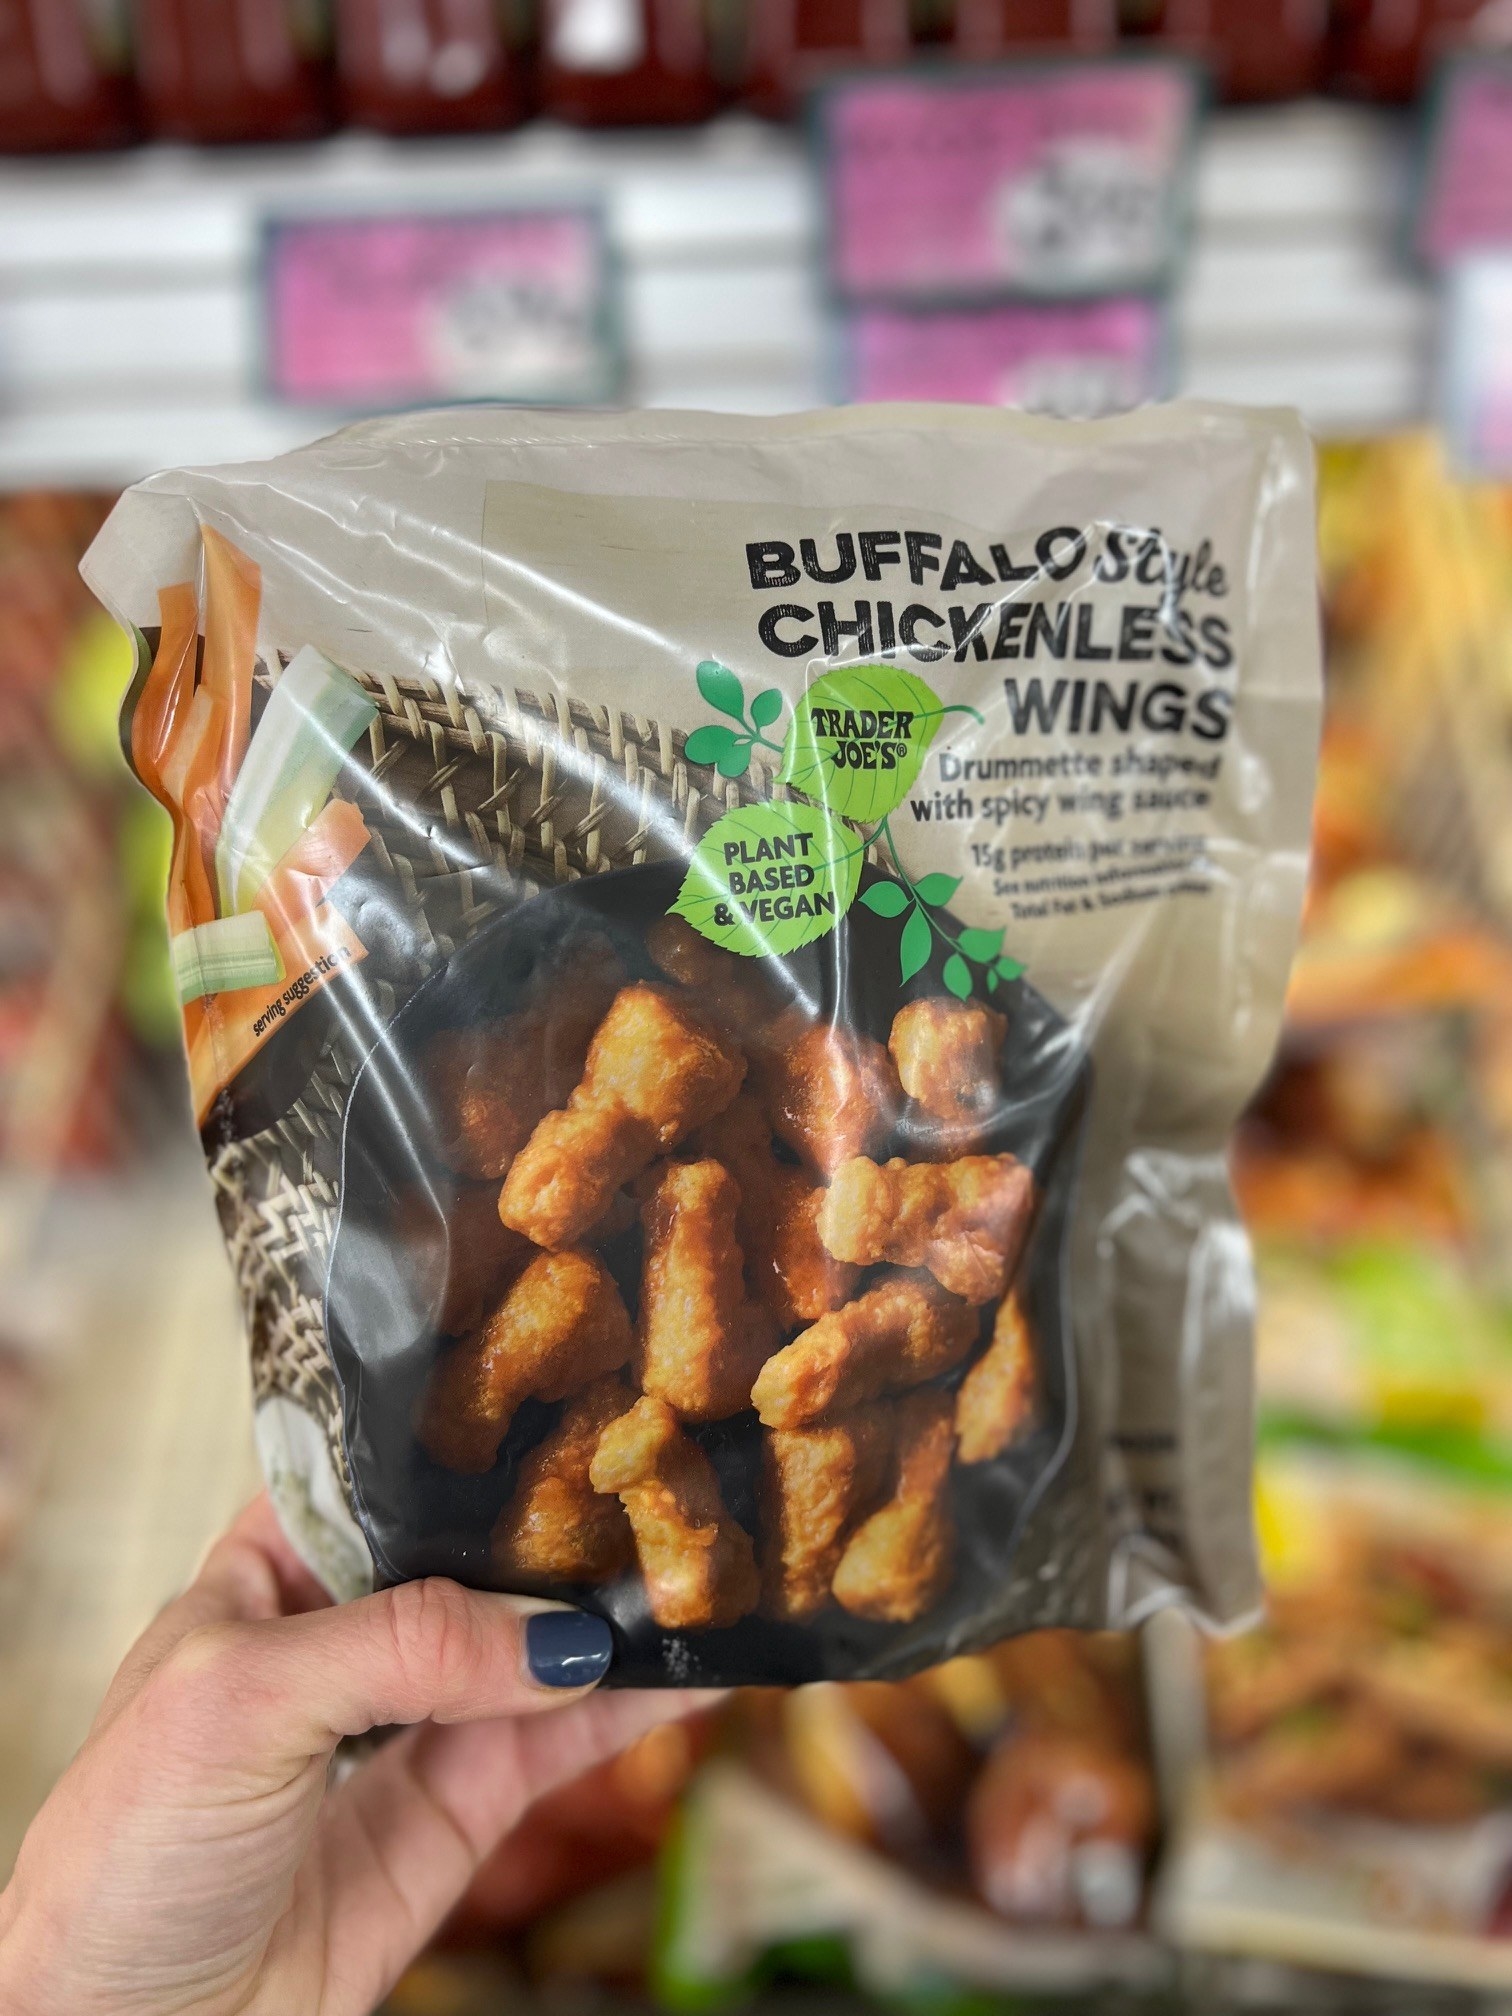 A package of Buffalo Style Chickenless Wings: &quot;drummette shaped with spicy wing sauce&quot;